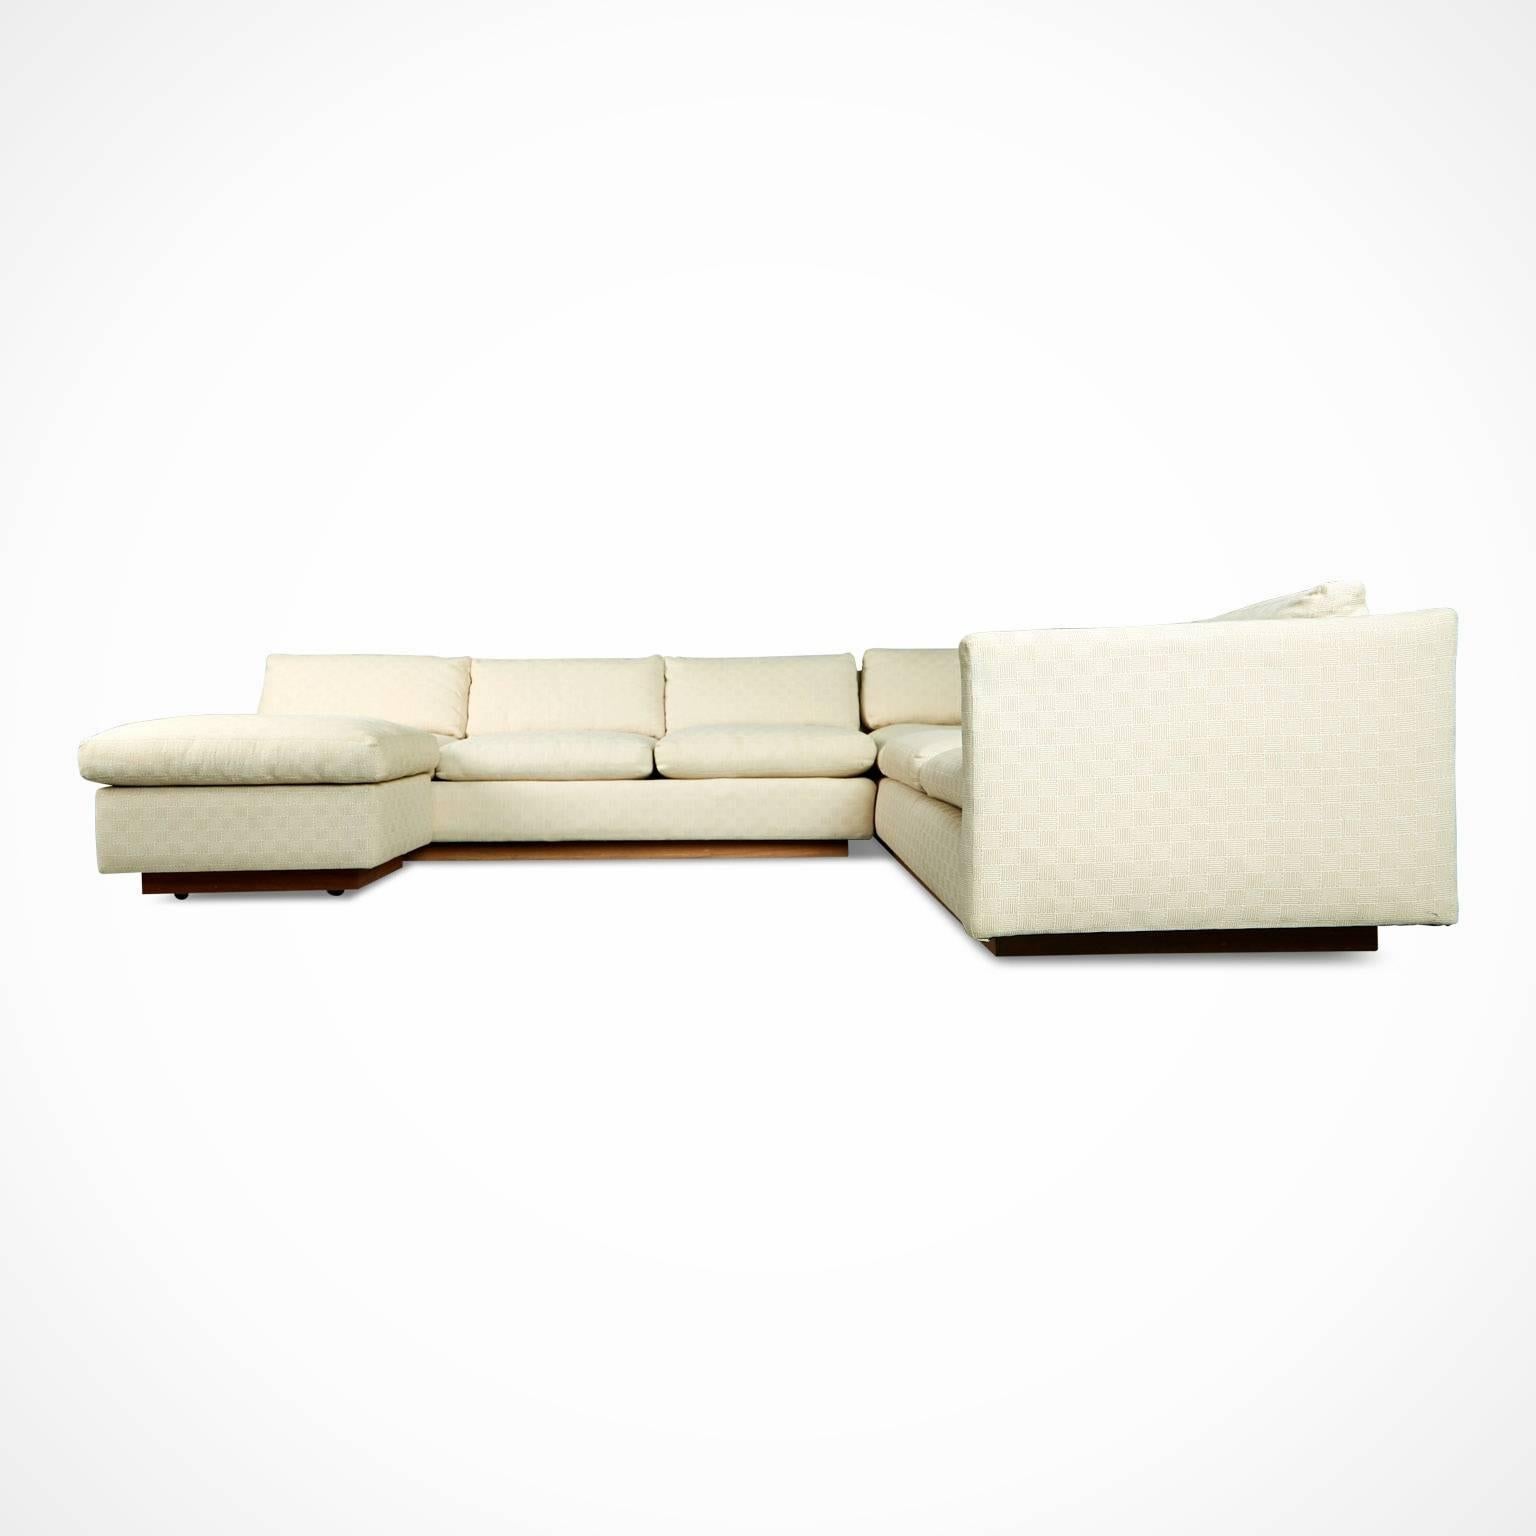 American Milo Baughman Sectional Sofa and Ottoman for Thayer Coggin, Signed & Dated 1976